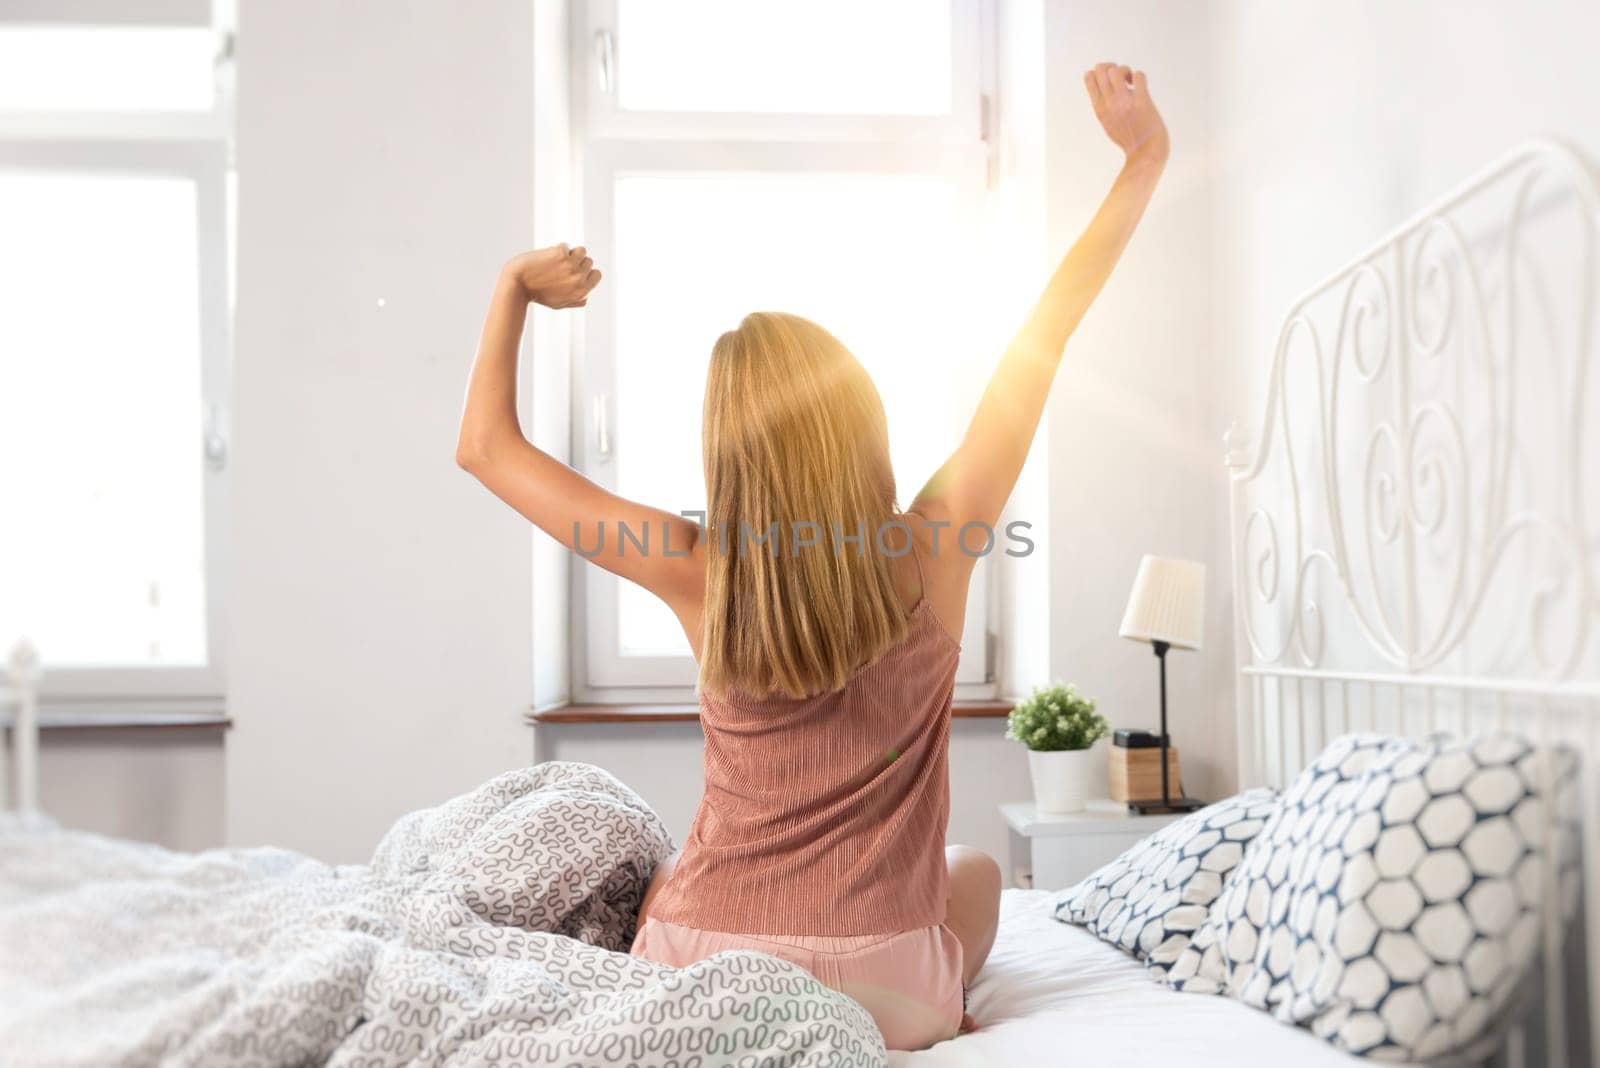 Back view of woman stretching in bed. Wake up at sunrise